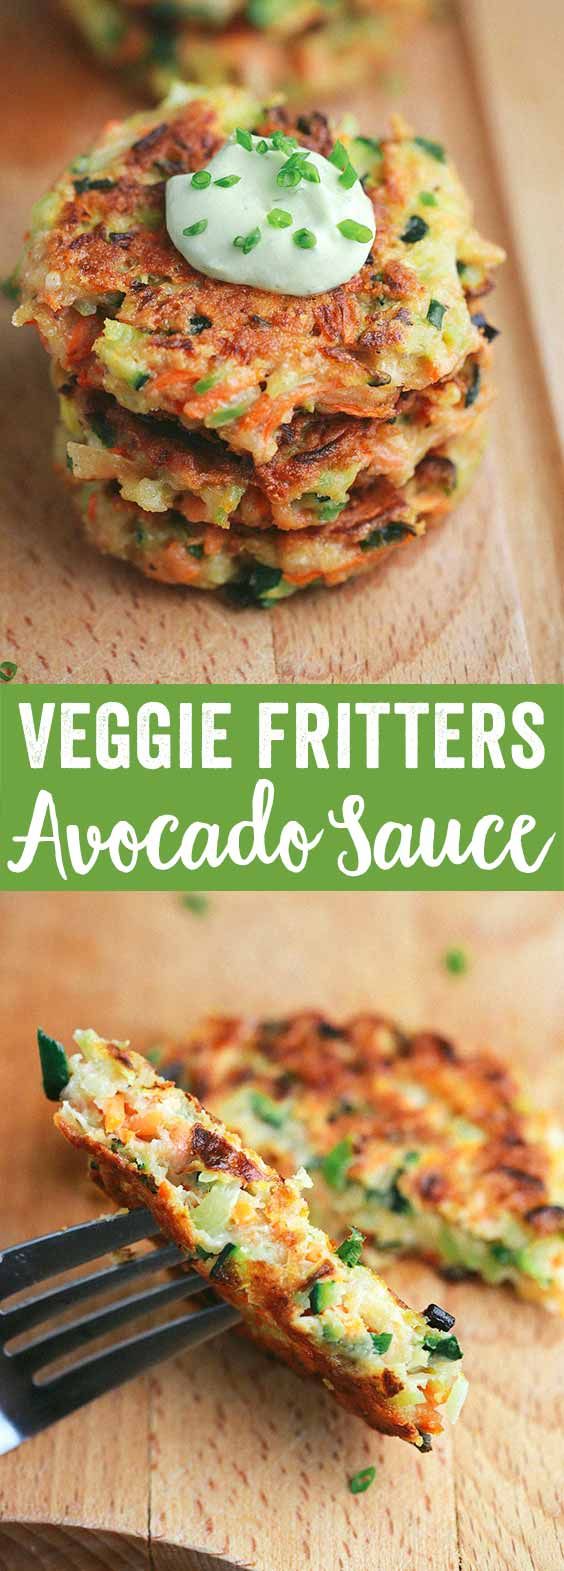 Crispy Vegetable Fritters with Avocado Yogurt Sauce - This recipe is packed with broccoli, carrots, and zucchini. Enjoy by dipping each appetizer bite into a delicious creamy sauce